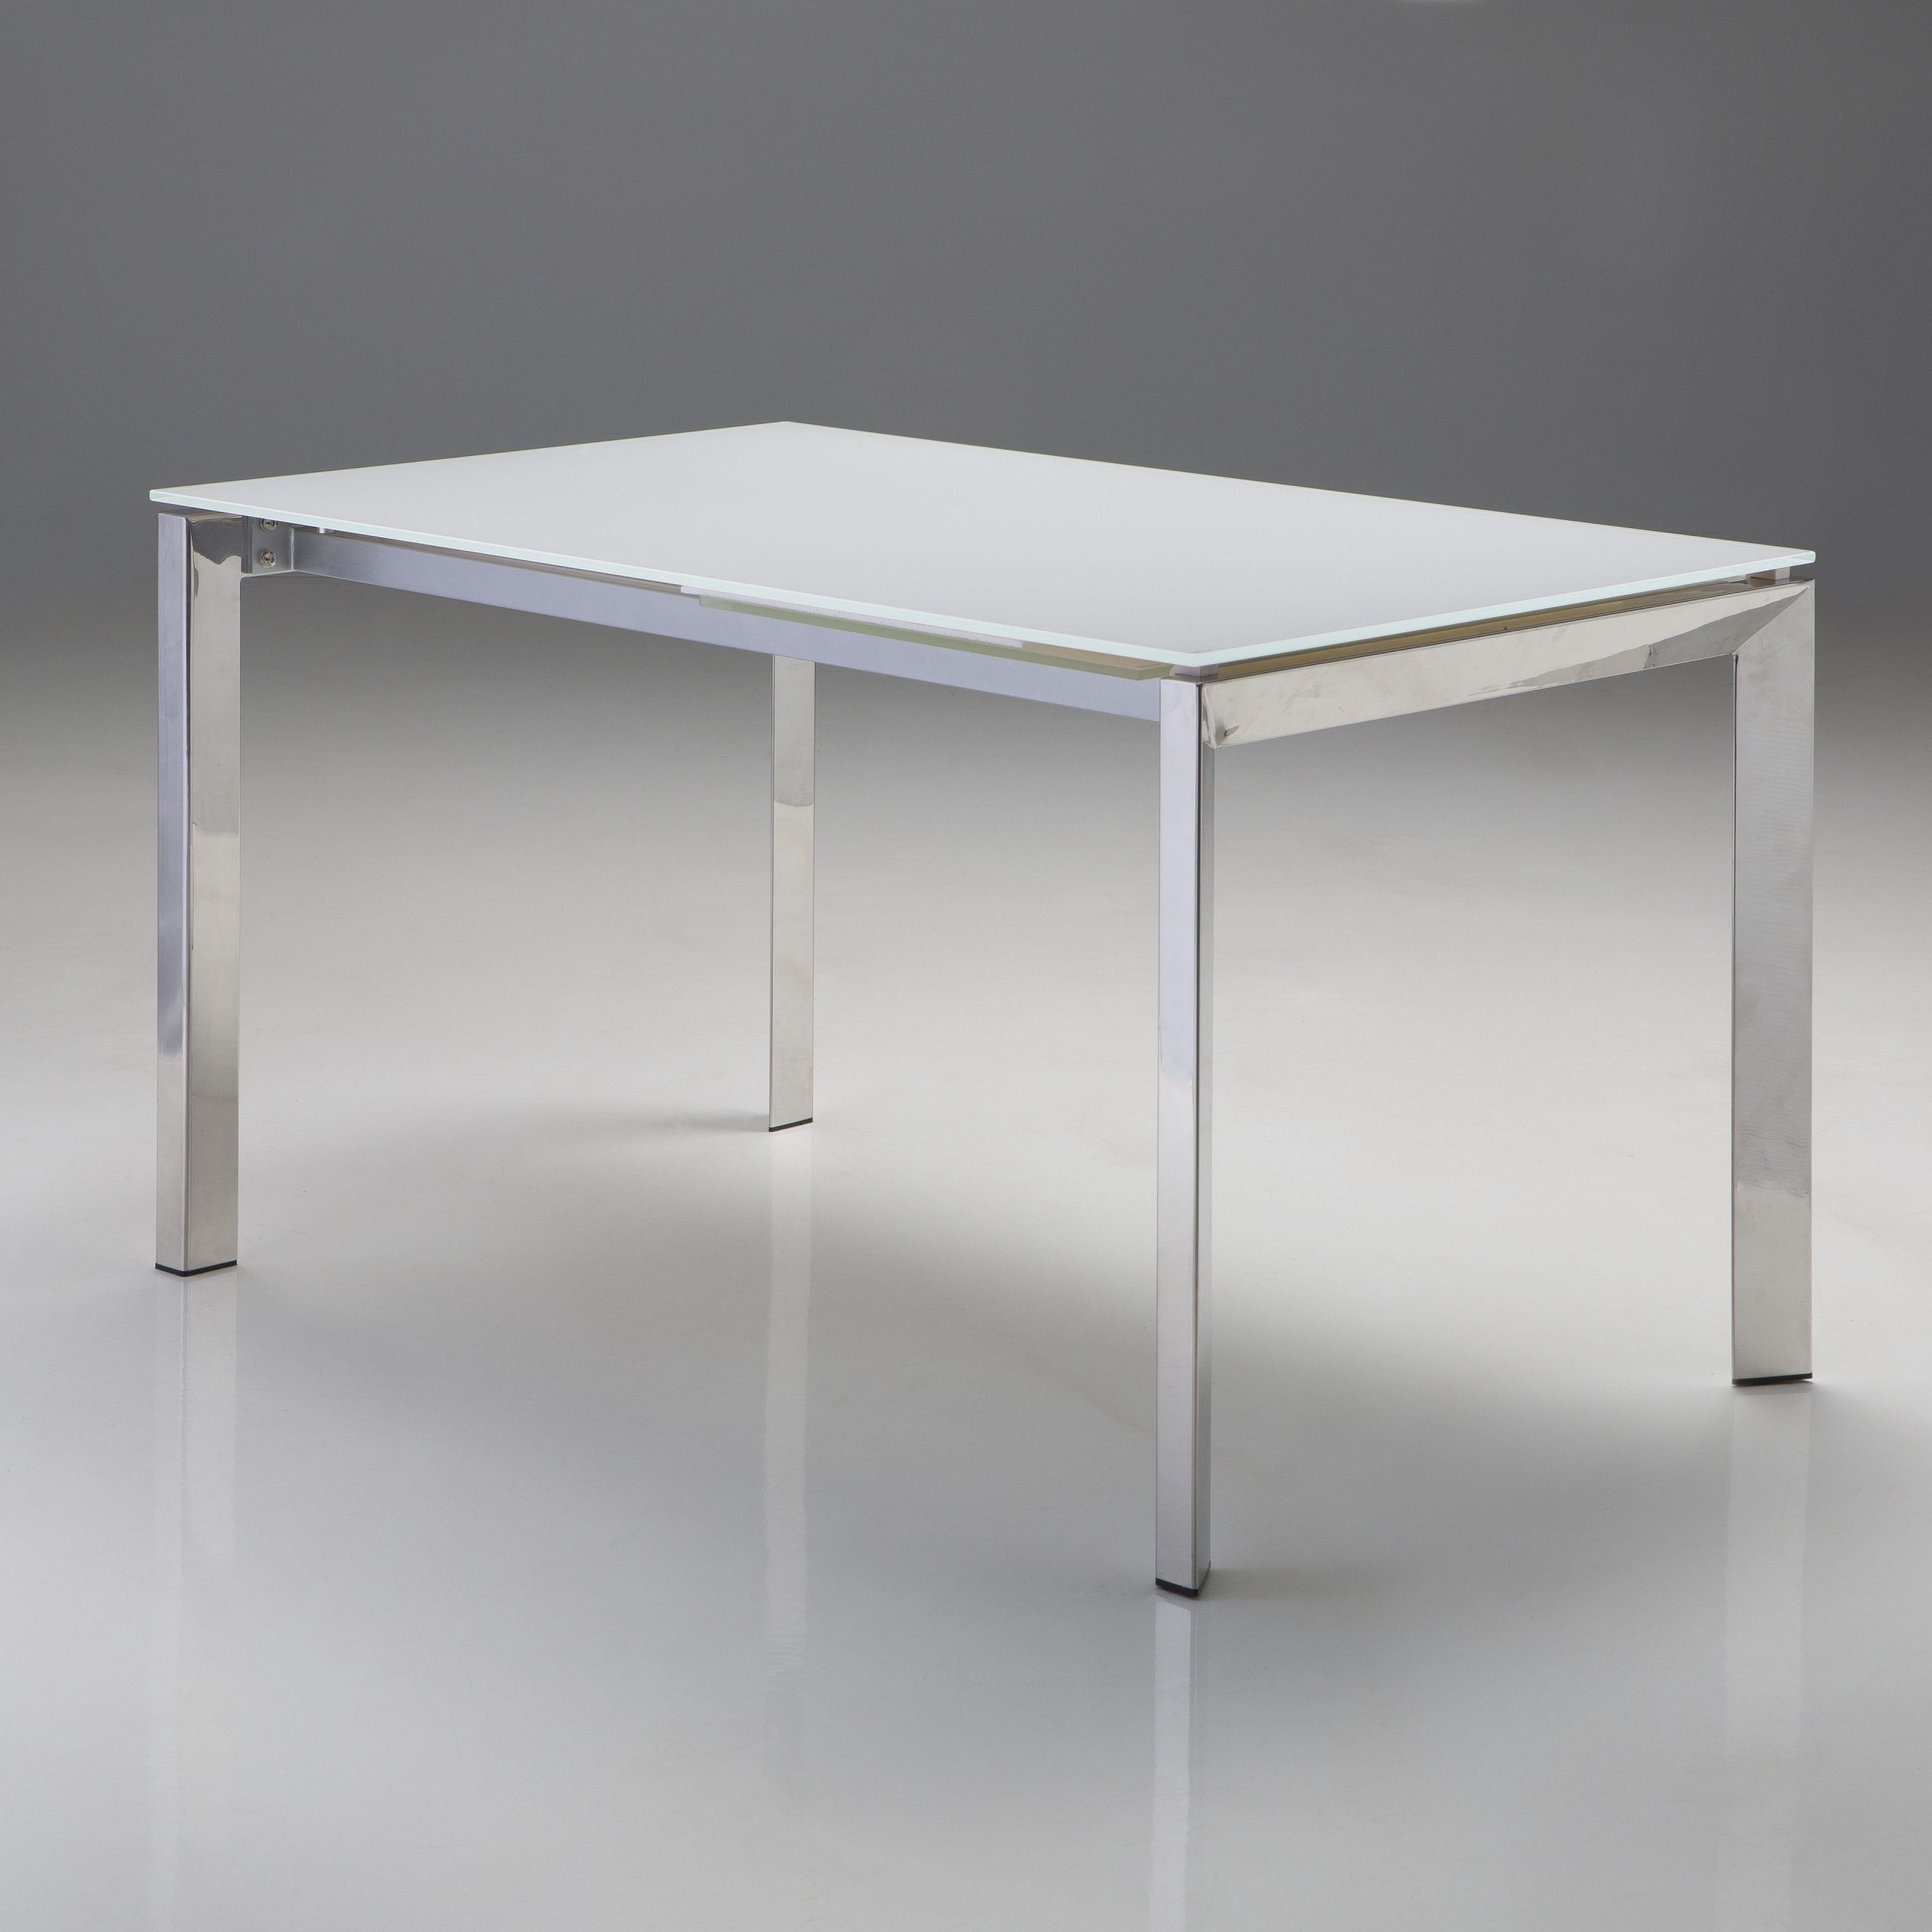 Alure Dining Table High Gloss White With Brushed Stainless Steel For Gloss White Steel Console Tables (View 2 of 20)